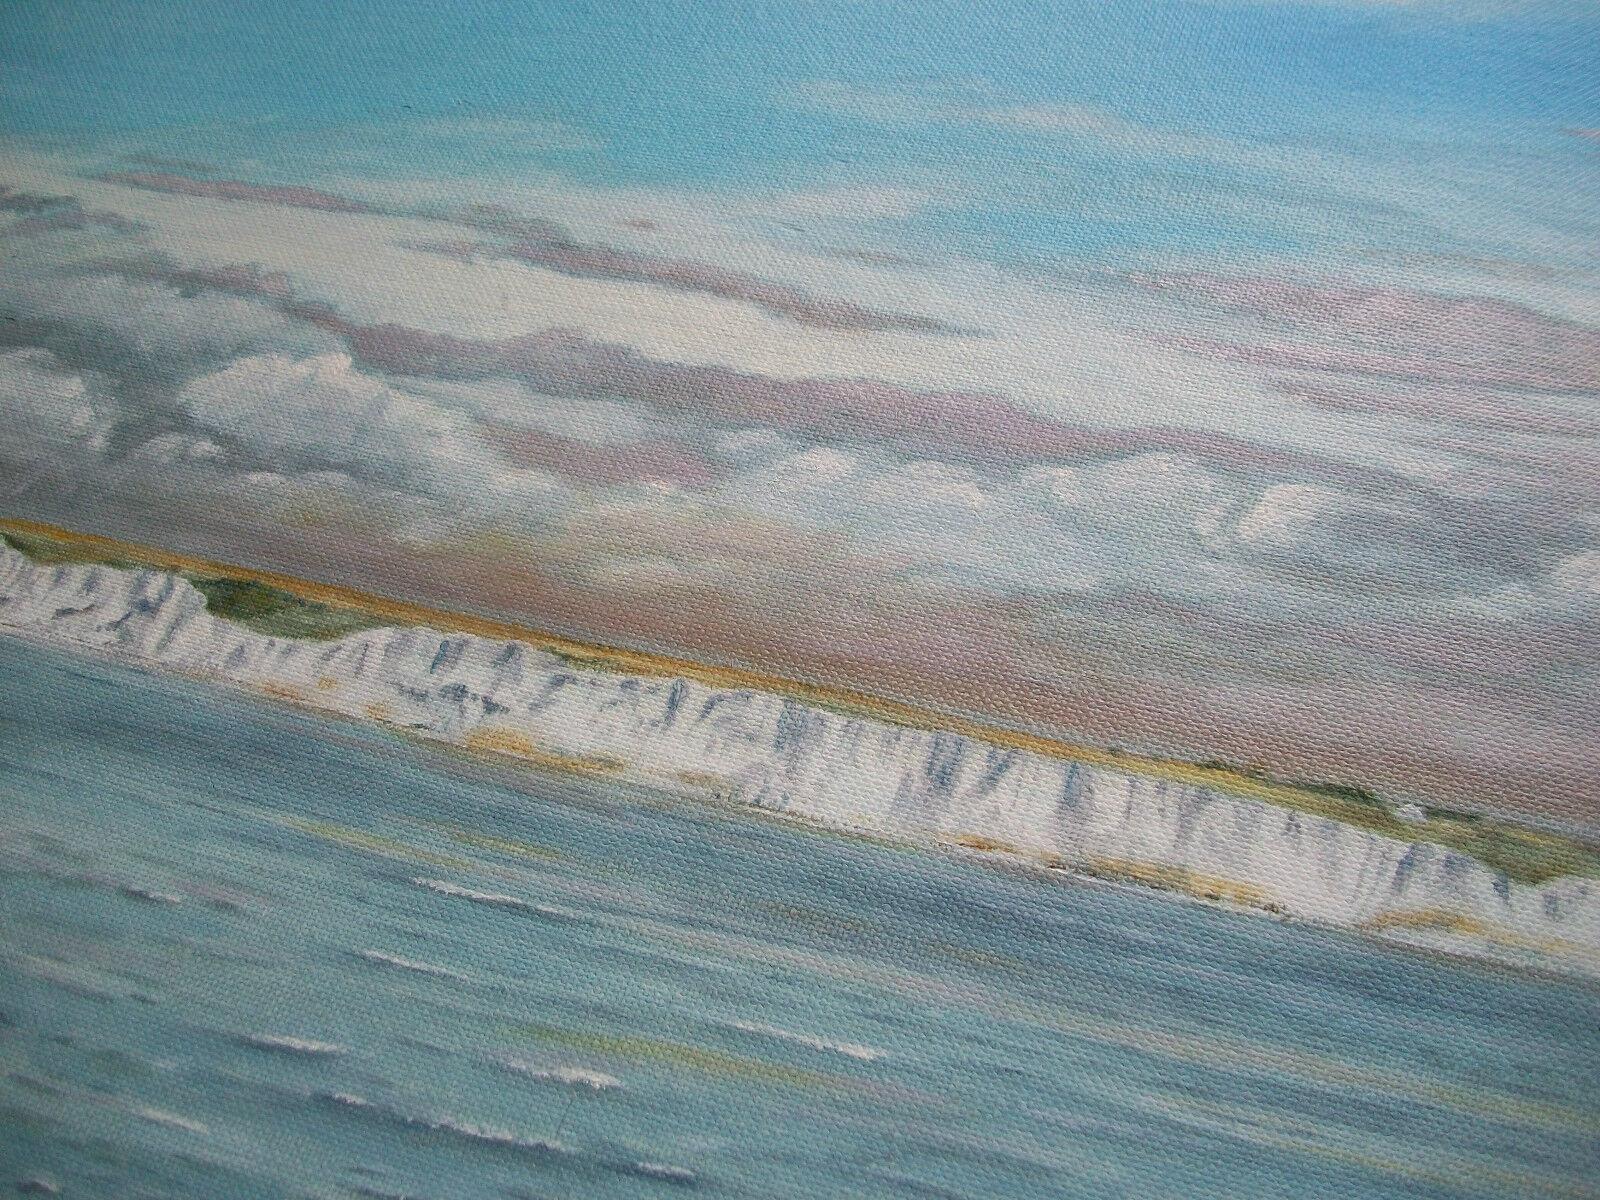 DAVID LANGDON - 'Cliffs of Dover' (untitled) - Contemporary oil painting on canvas board - signed lower right - unframed - Canada - circa 2000.

Excellent condition - no loss - no damage - no restoration - ready to frame.

Size - 20